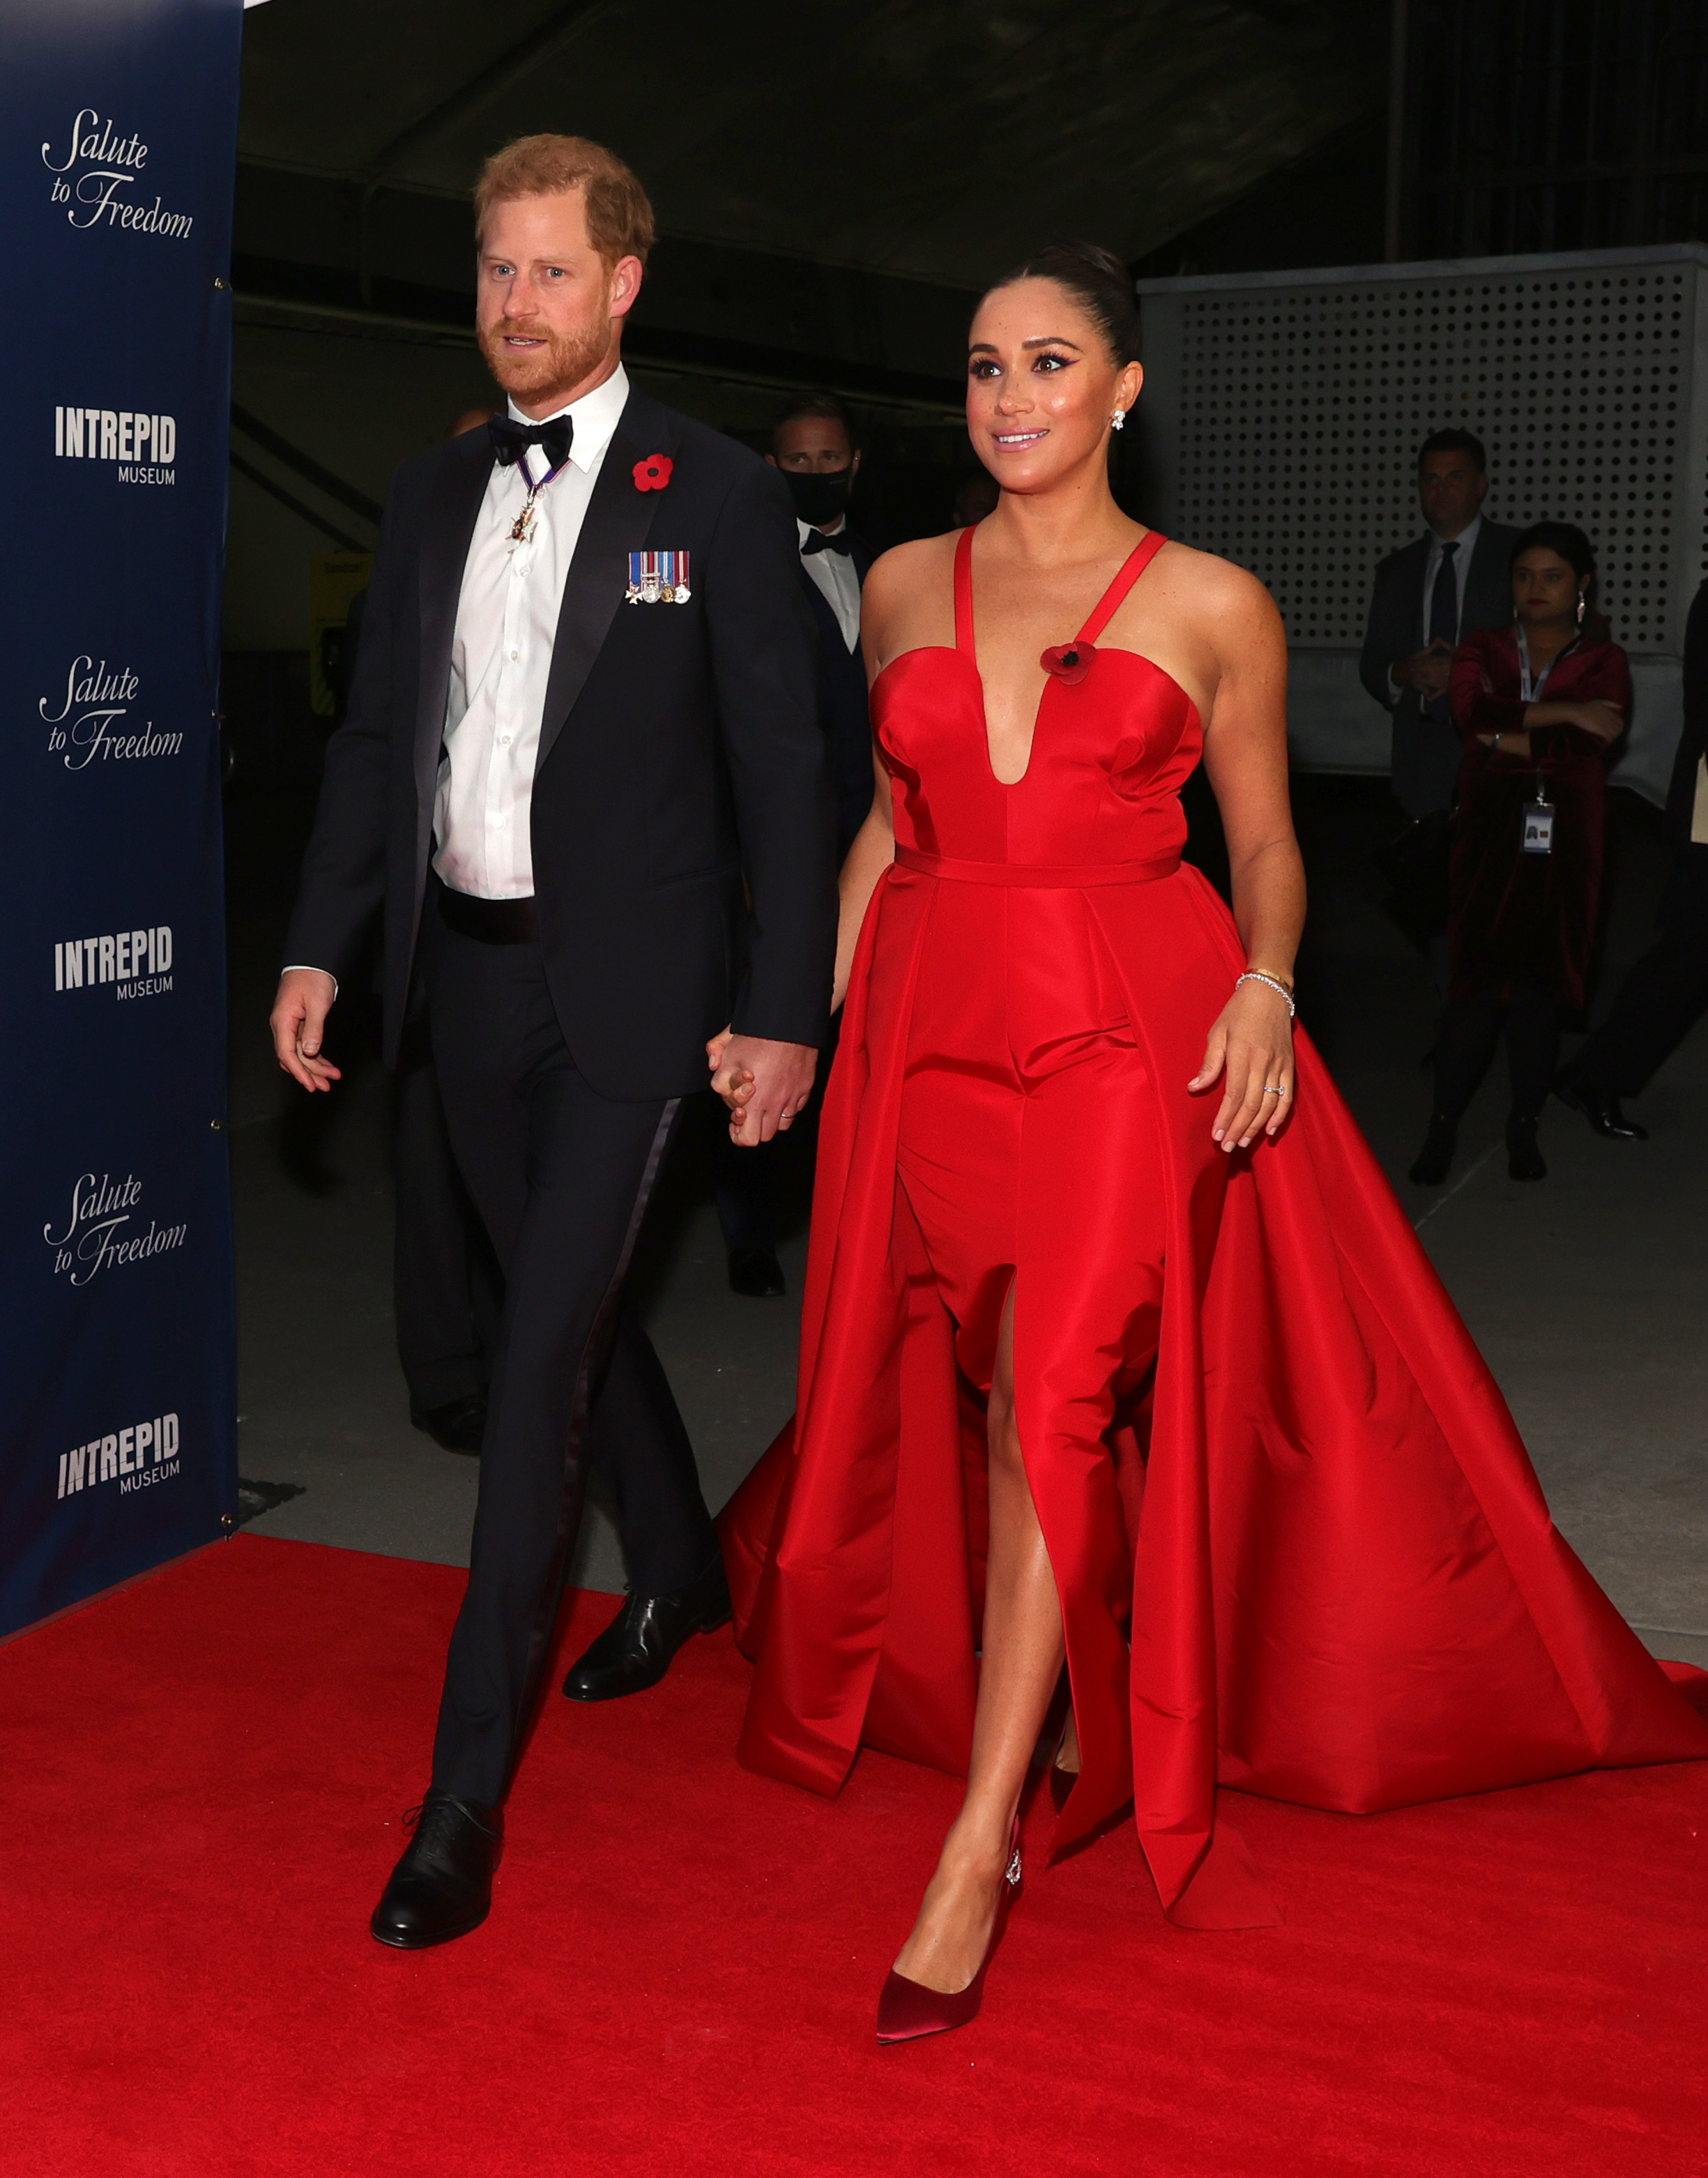 Prince Harry, Duke of Sussex and Meghan, Duchess of Sussex attend the Salute To Freedom Gala in New York City, on November 10, 2021. | Source: Getty Images